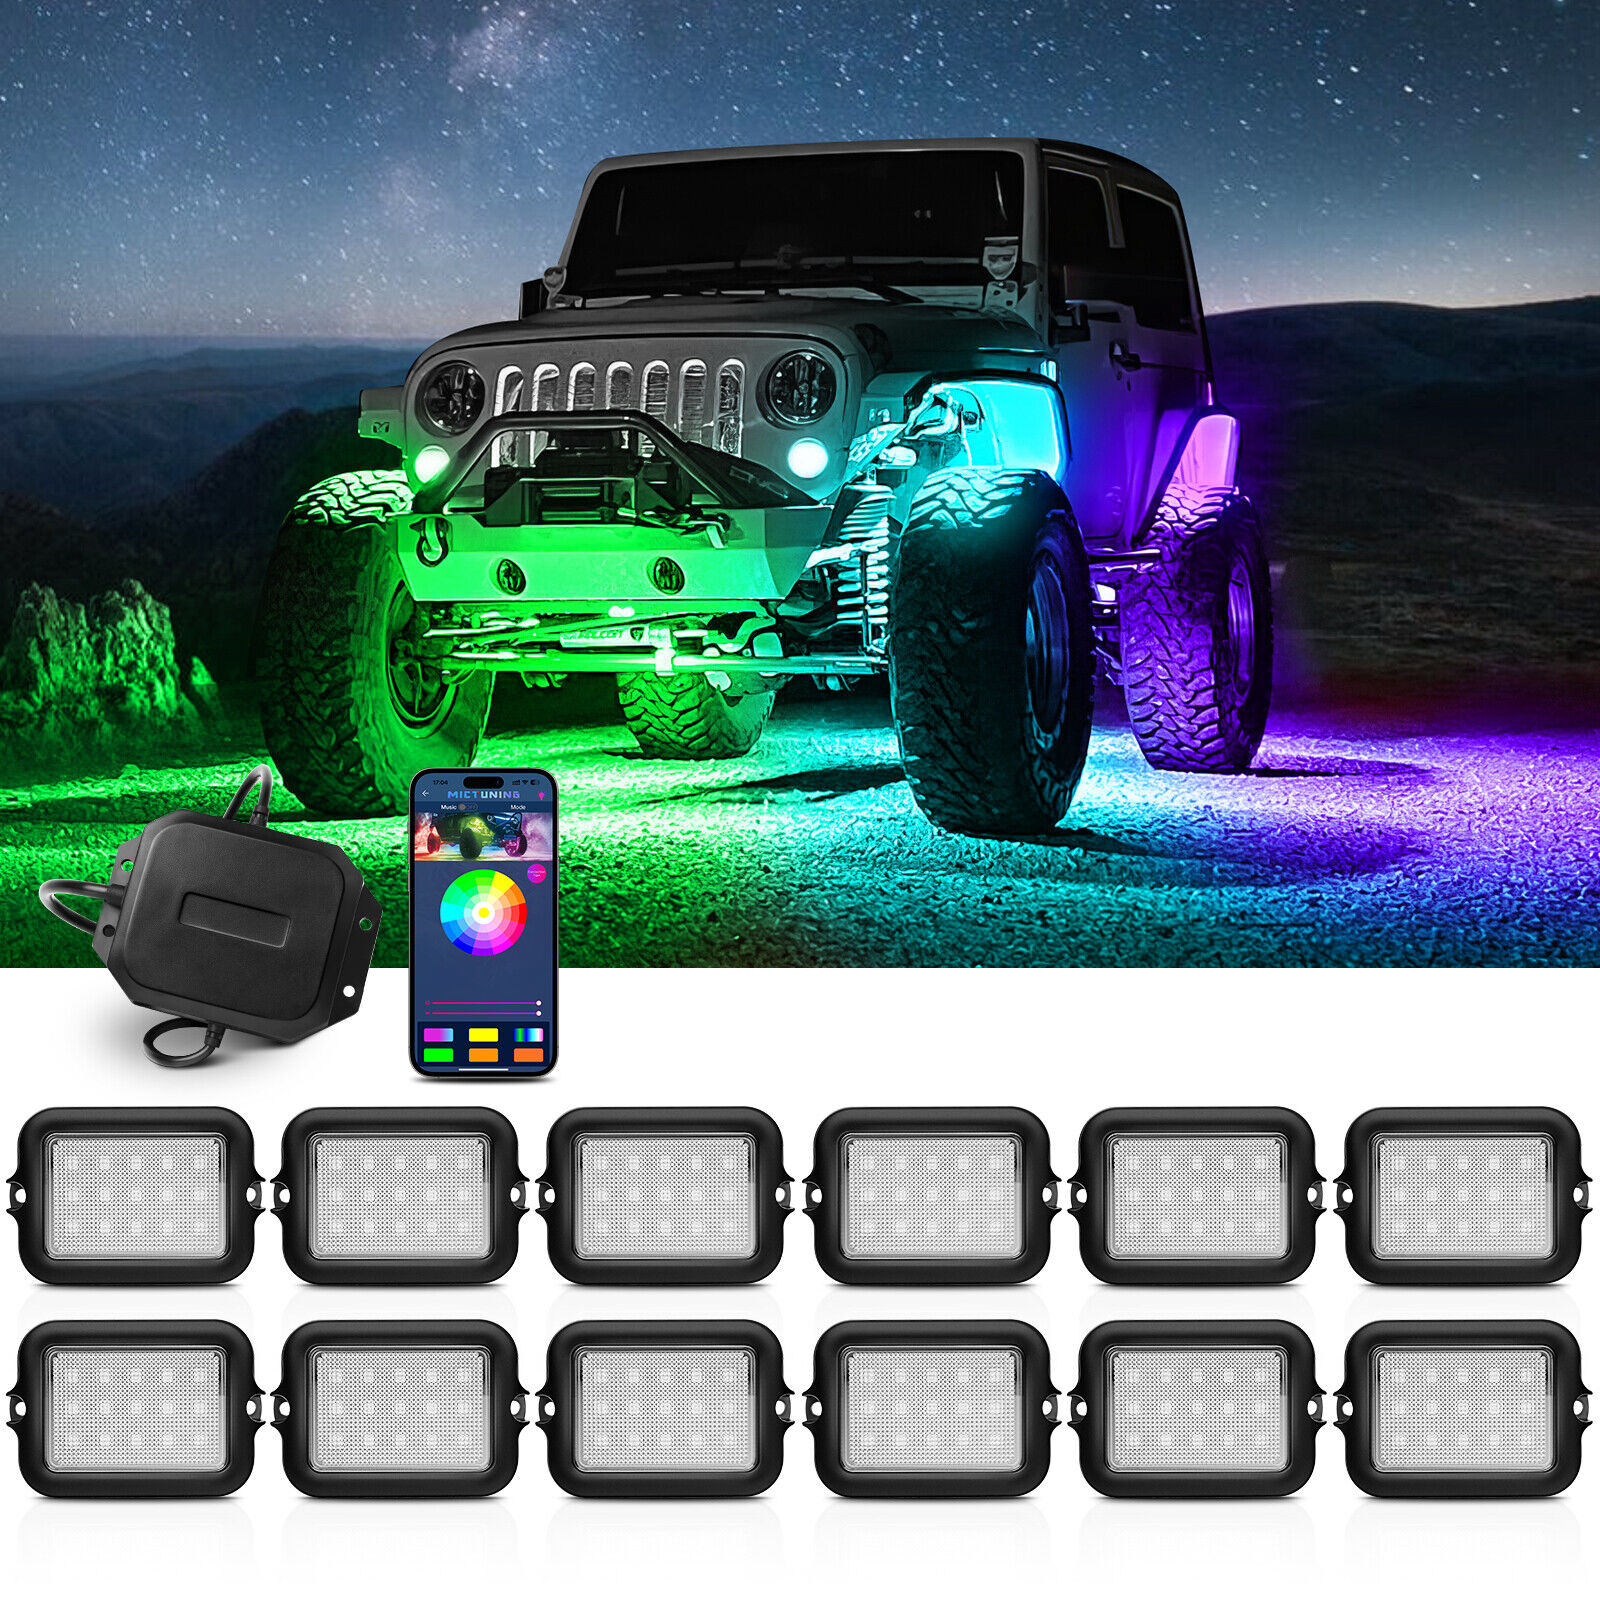 MICTUNING Y1 RGB+IC Dream Color LED Rock Lights Kit - 𝐔𝐩𝐠𝐫𝐚𝐝𝐞𝐝 12 Pods